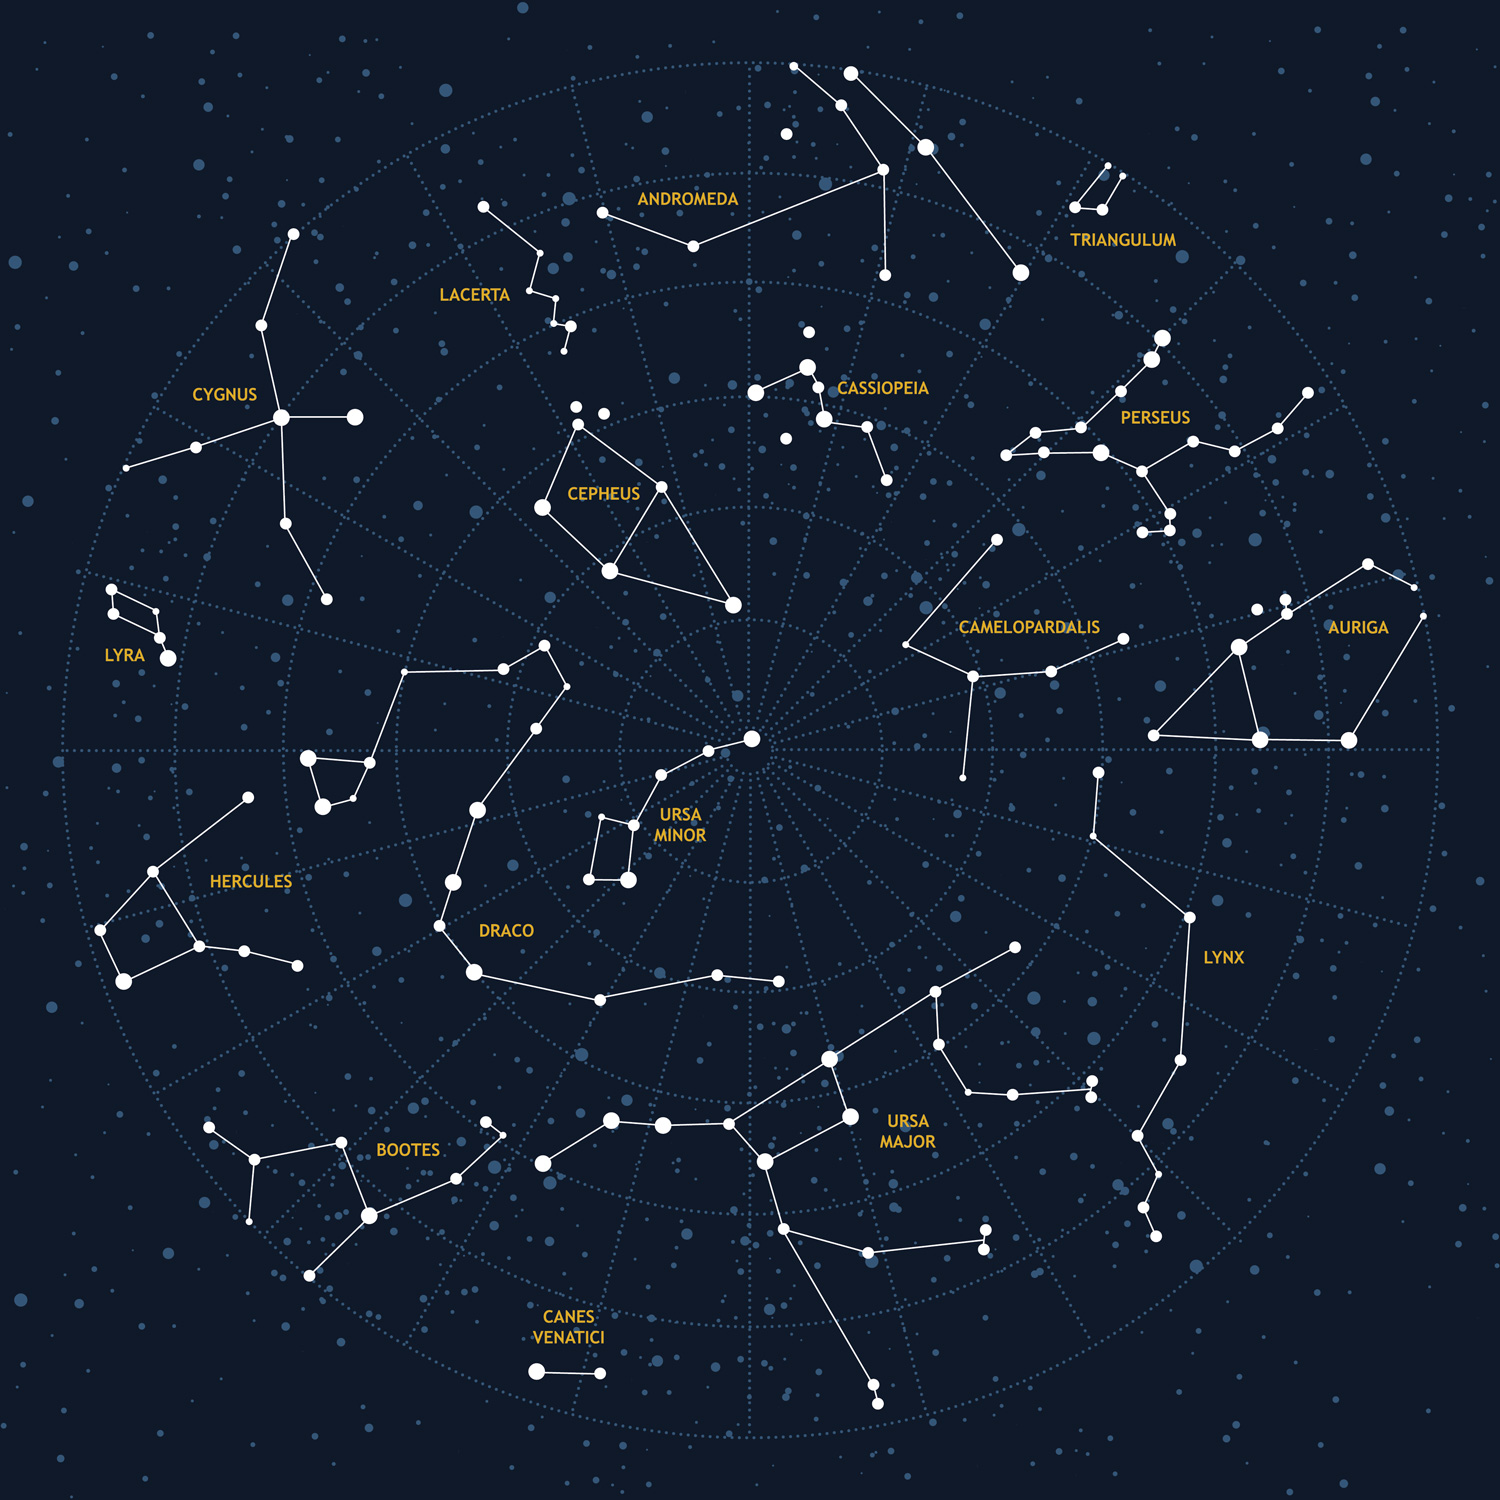 Illustration of labeled constellations